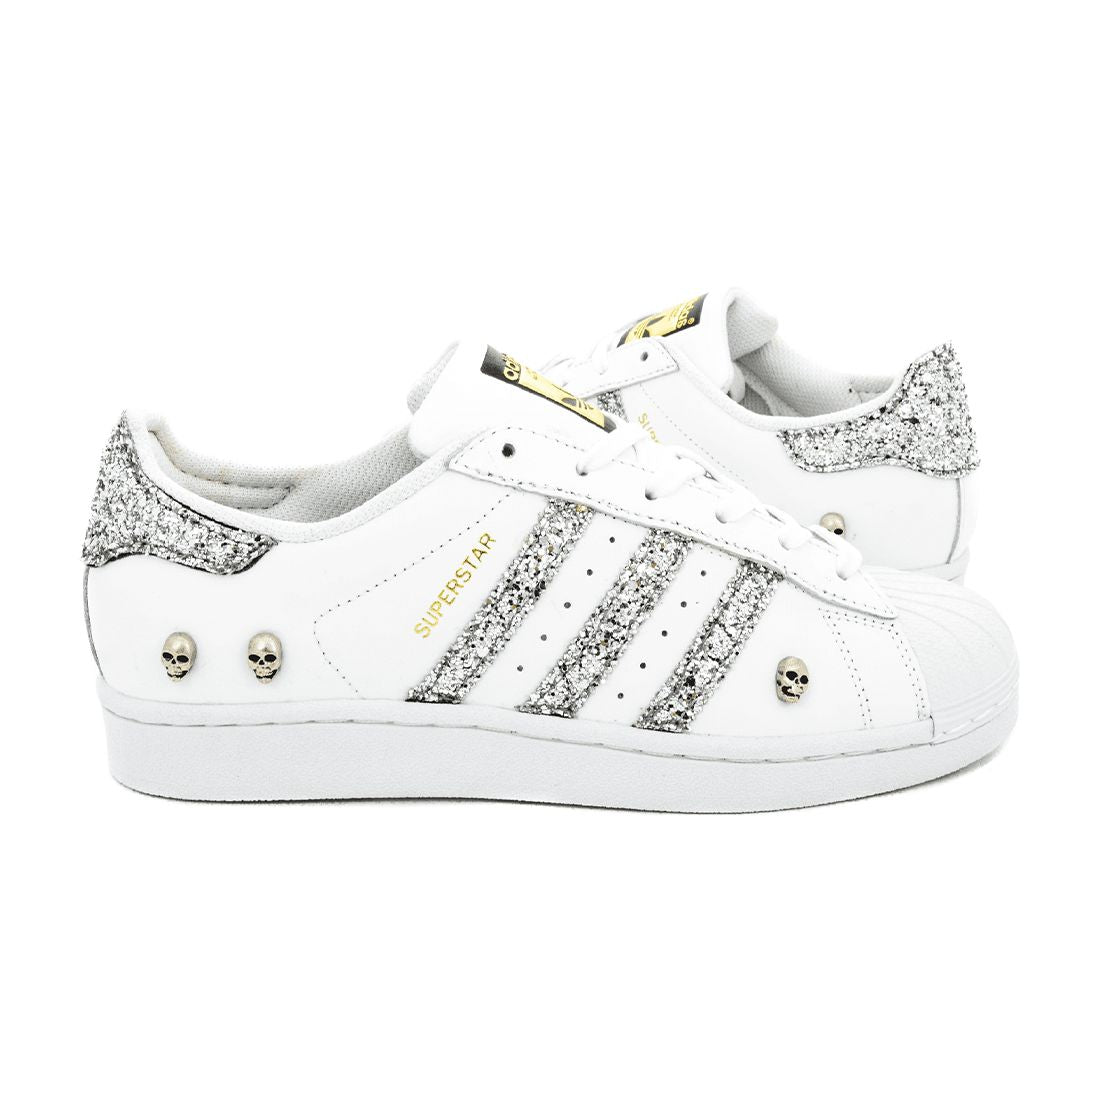 ADIDAS SUPERSTAR PERSONALIZZATE EACO